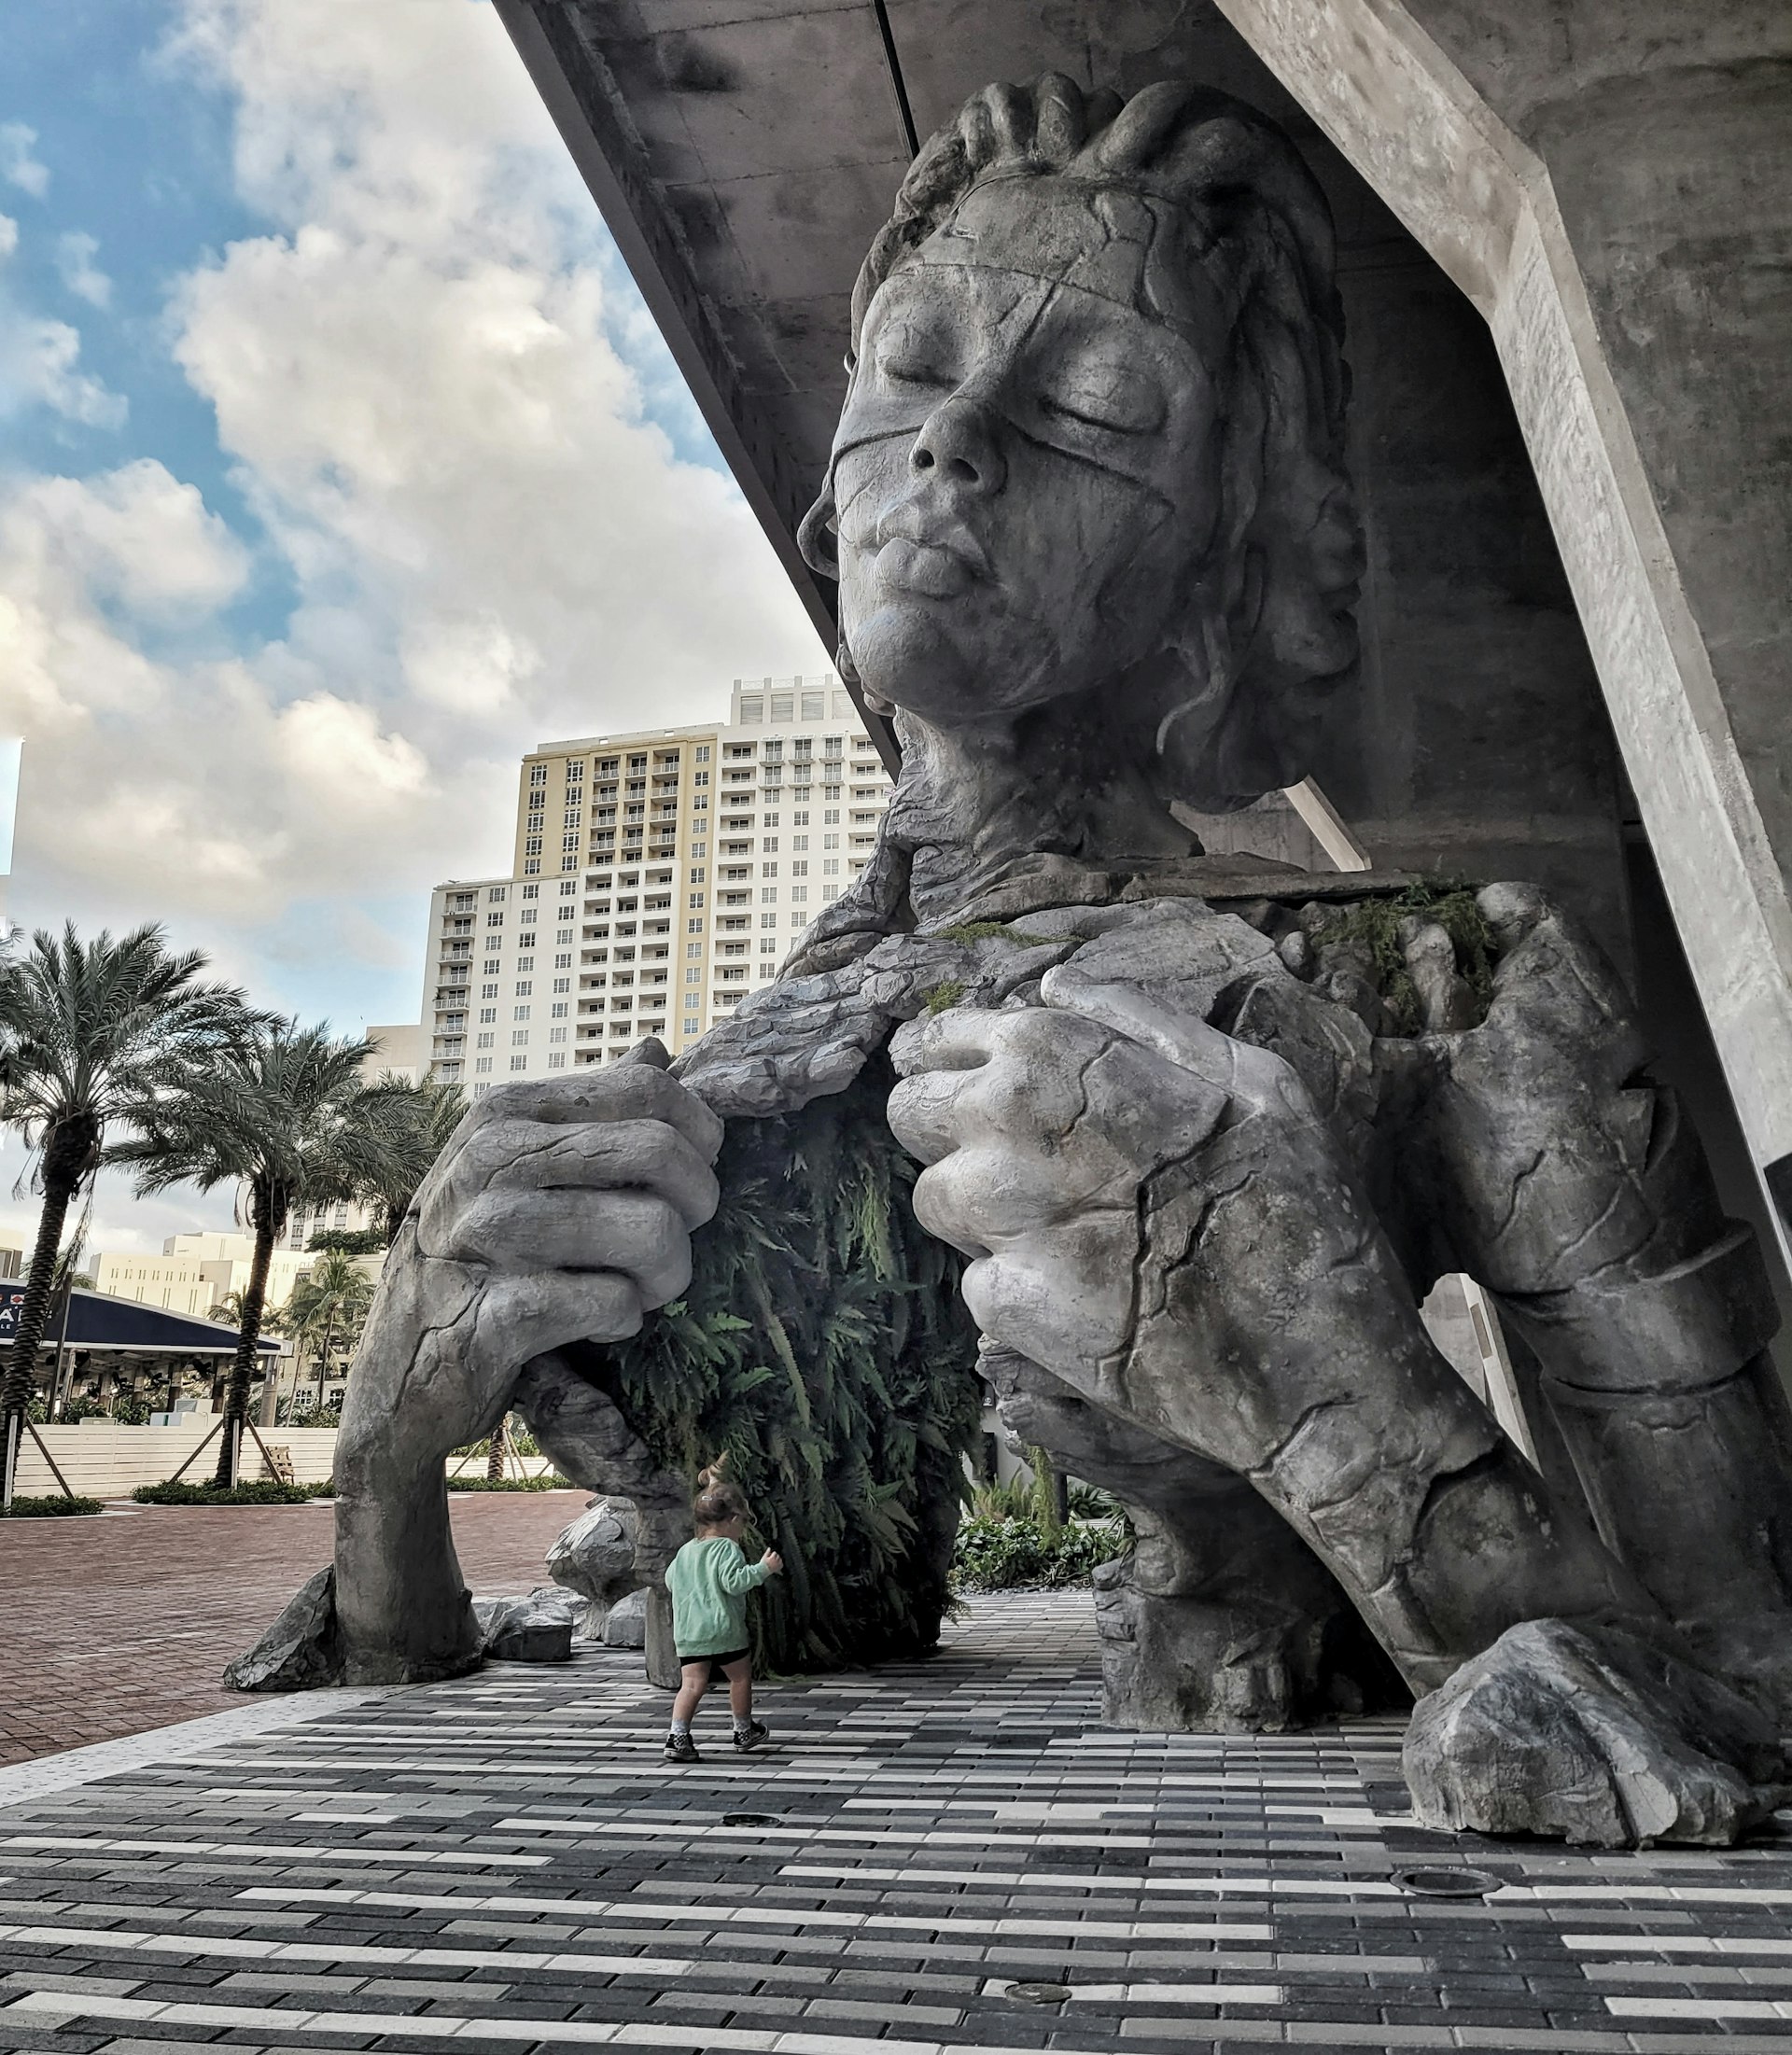 A picture of the sculpture with a little child heading towards the fern tunnel